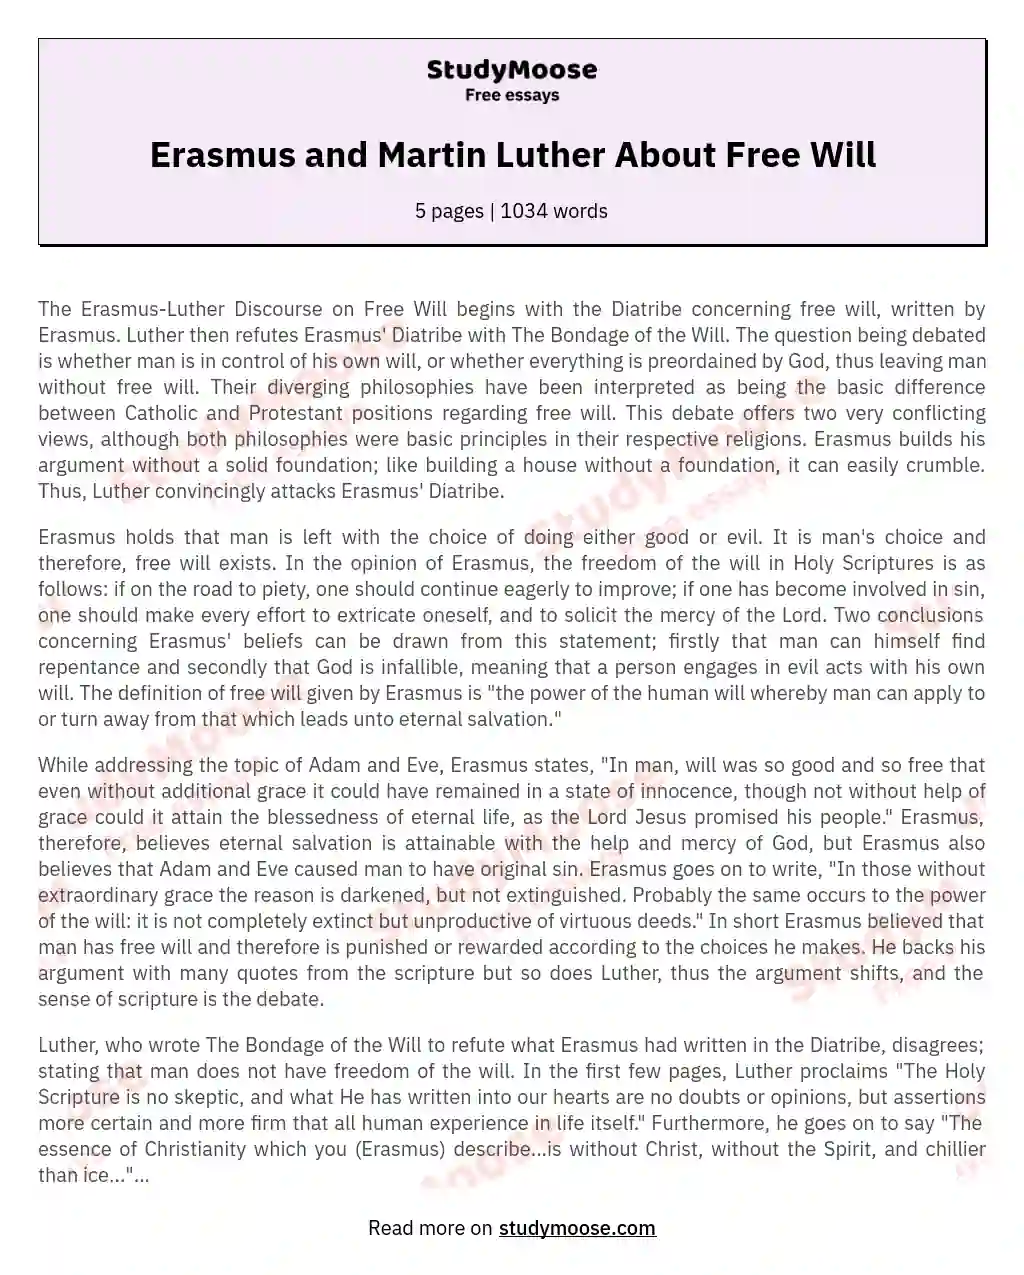 Erasmus and Martin Luther About Free Will essay